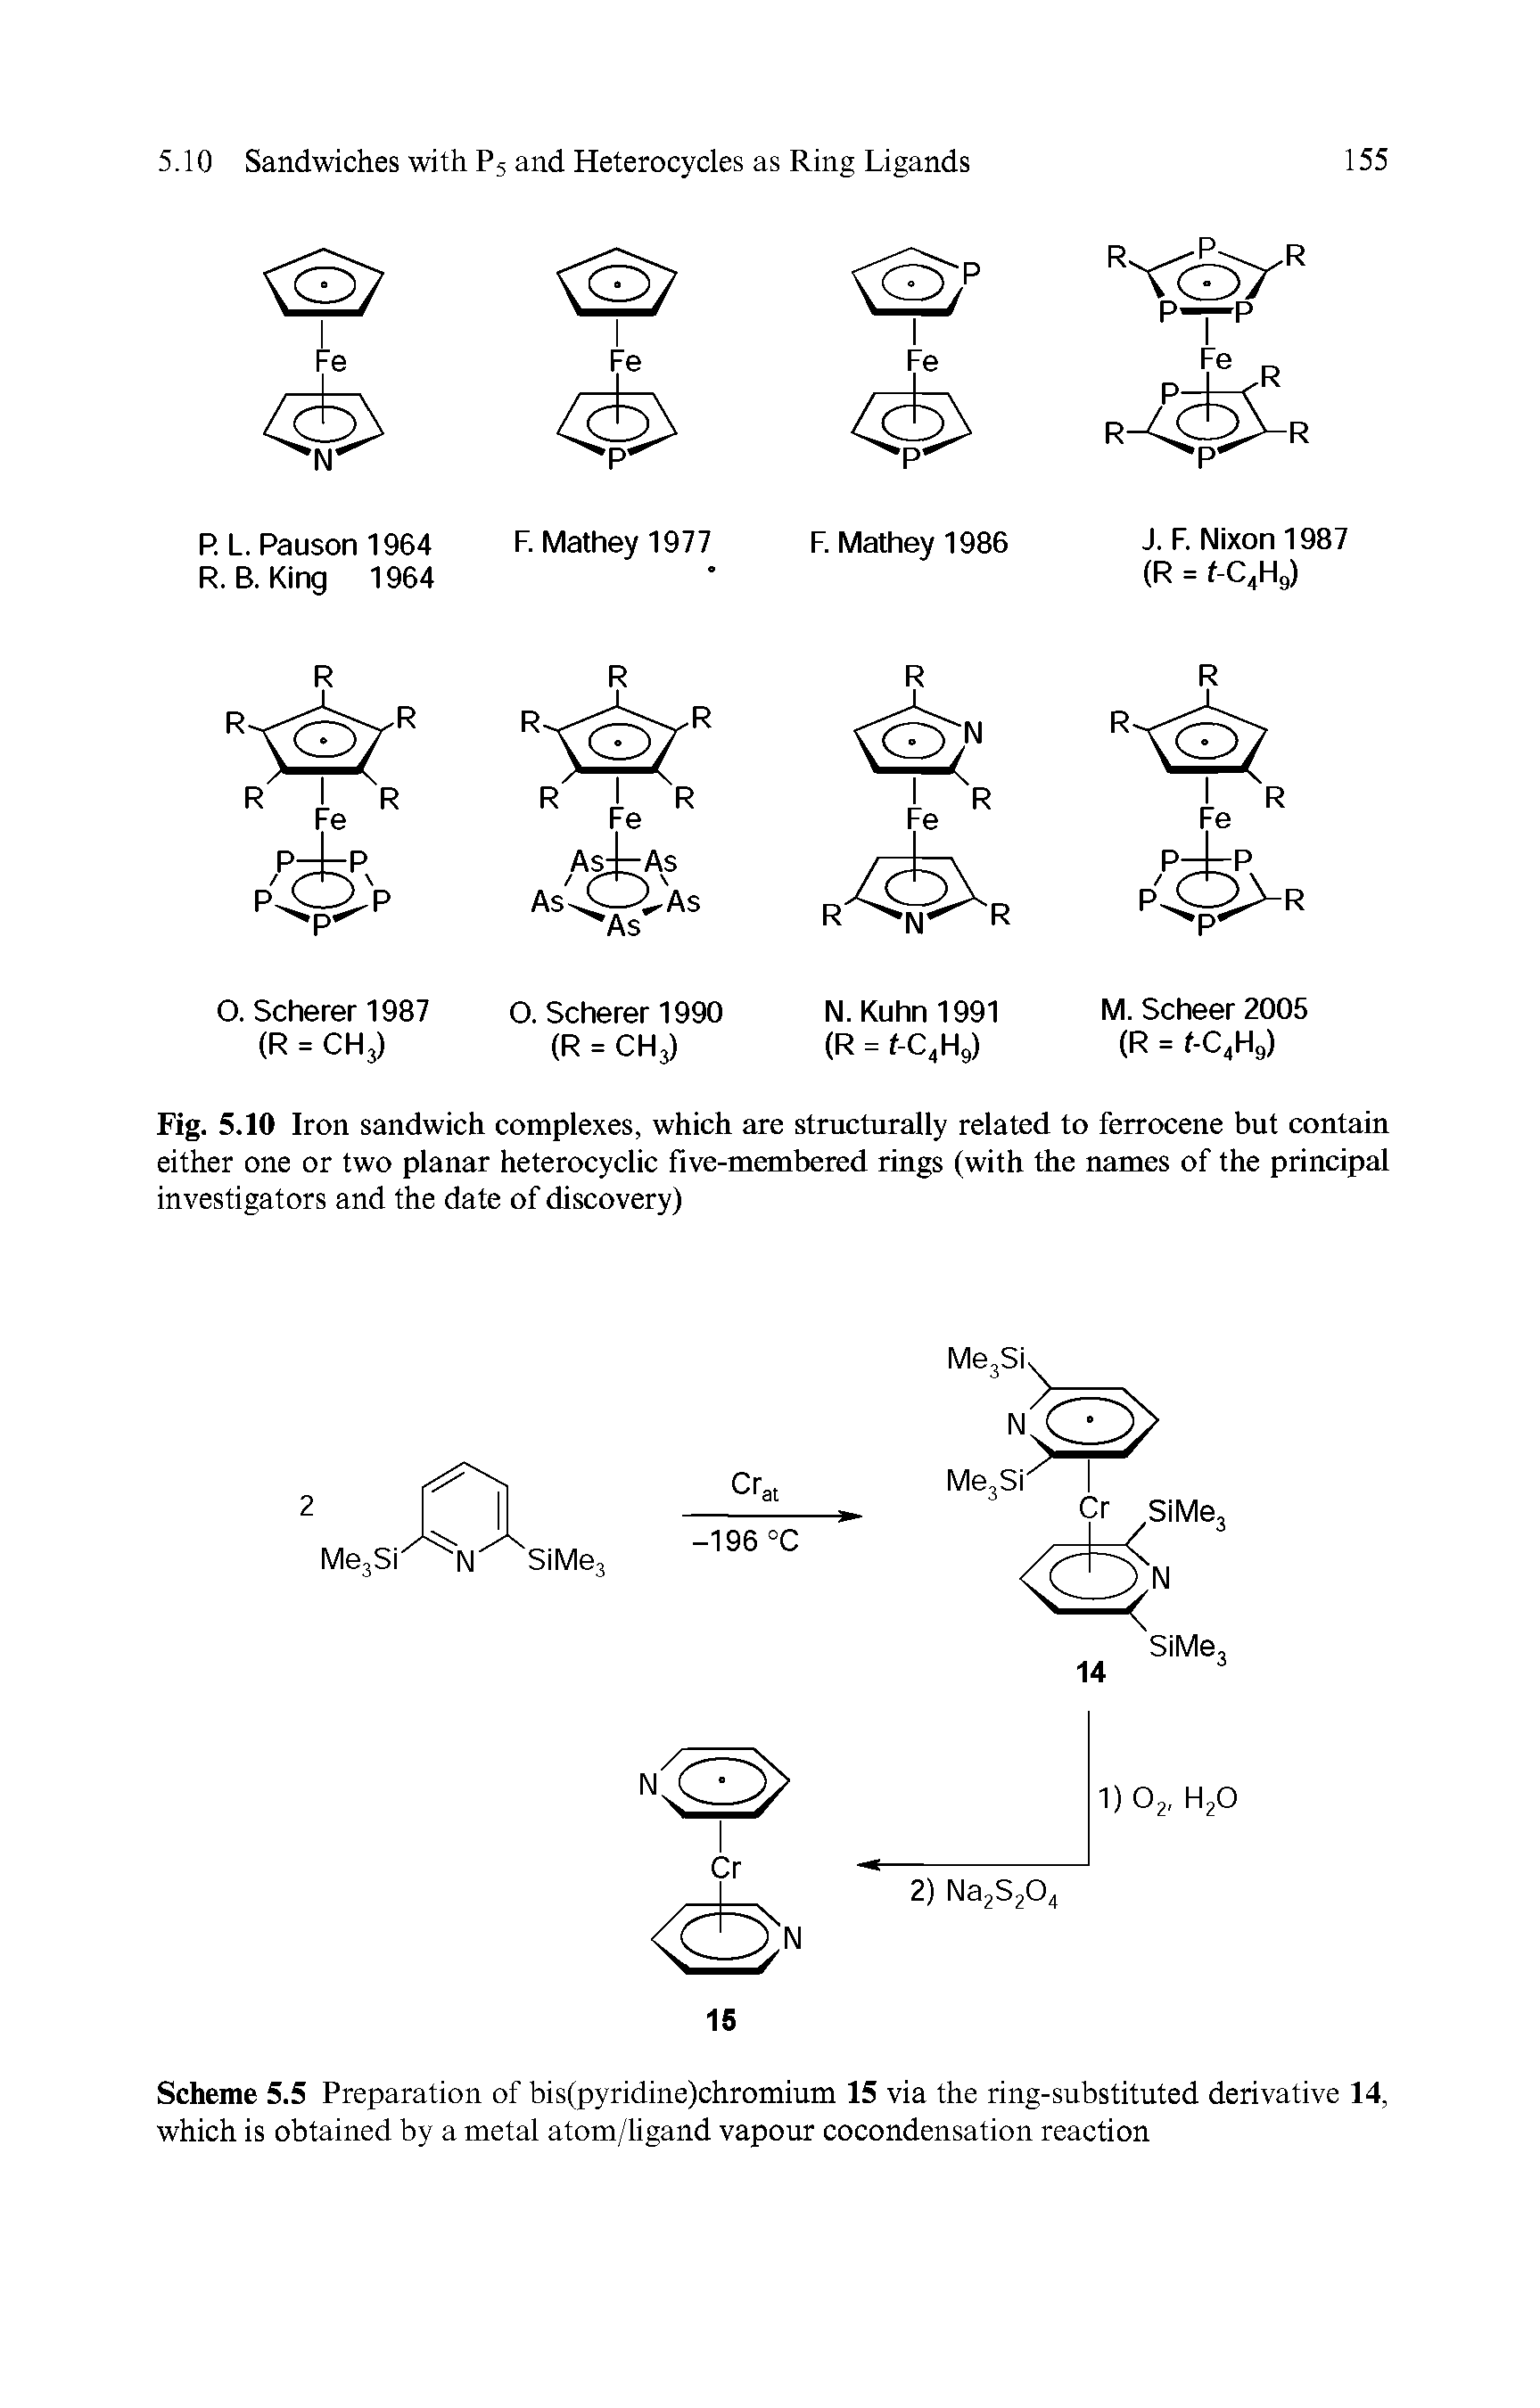 Scheme 5.5 Preparation of bis(pyridine)chromium 15 via the ring-substituted derivative 14, which is obtained by a metal atom/ligand vapour cocondensation reaction...